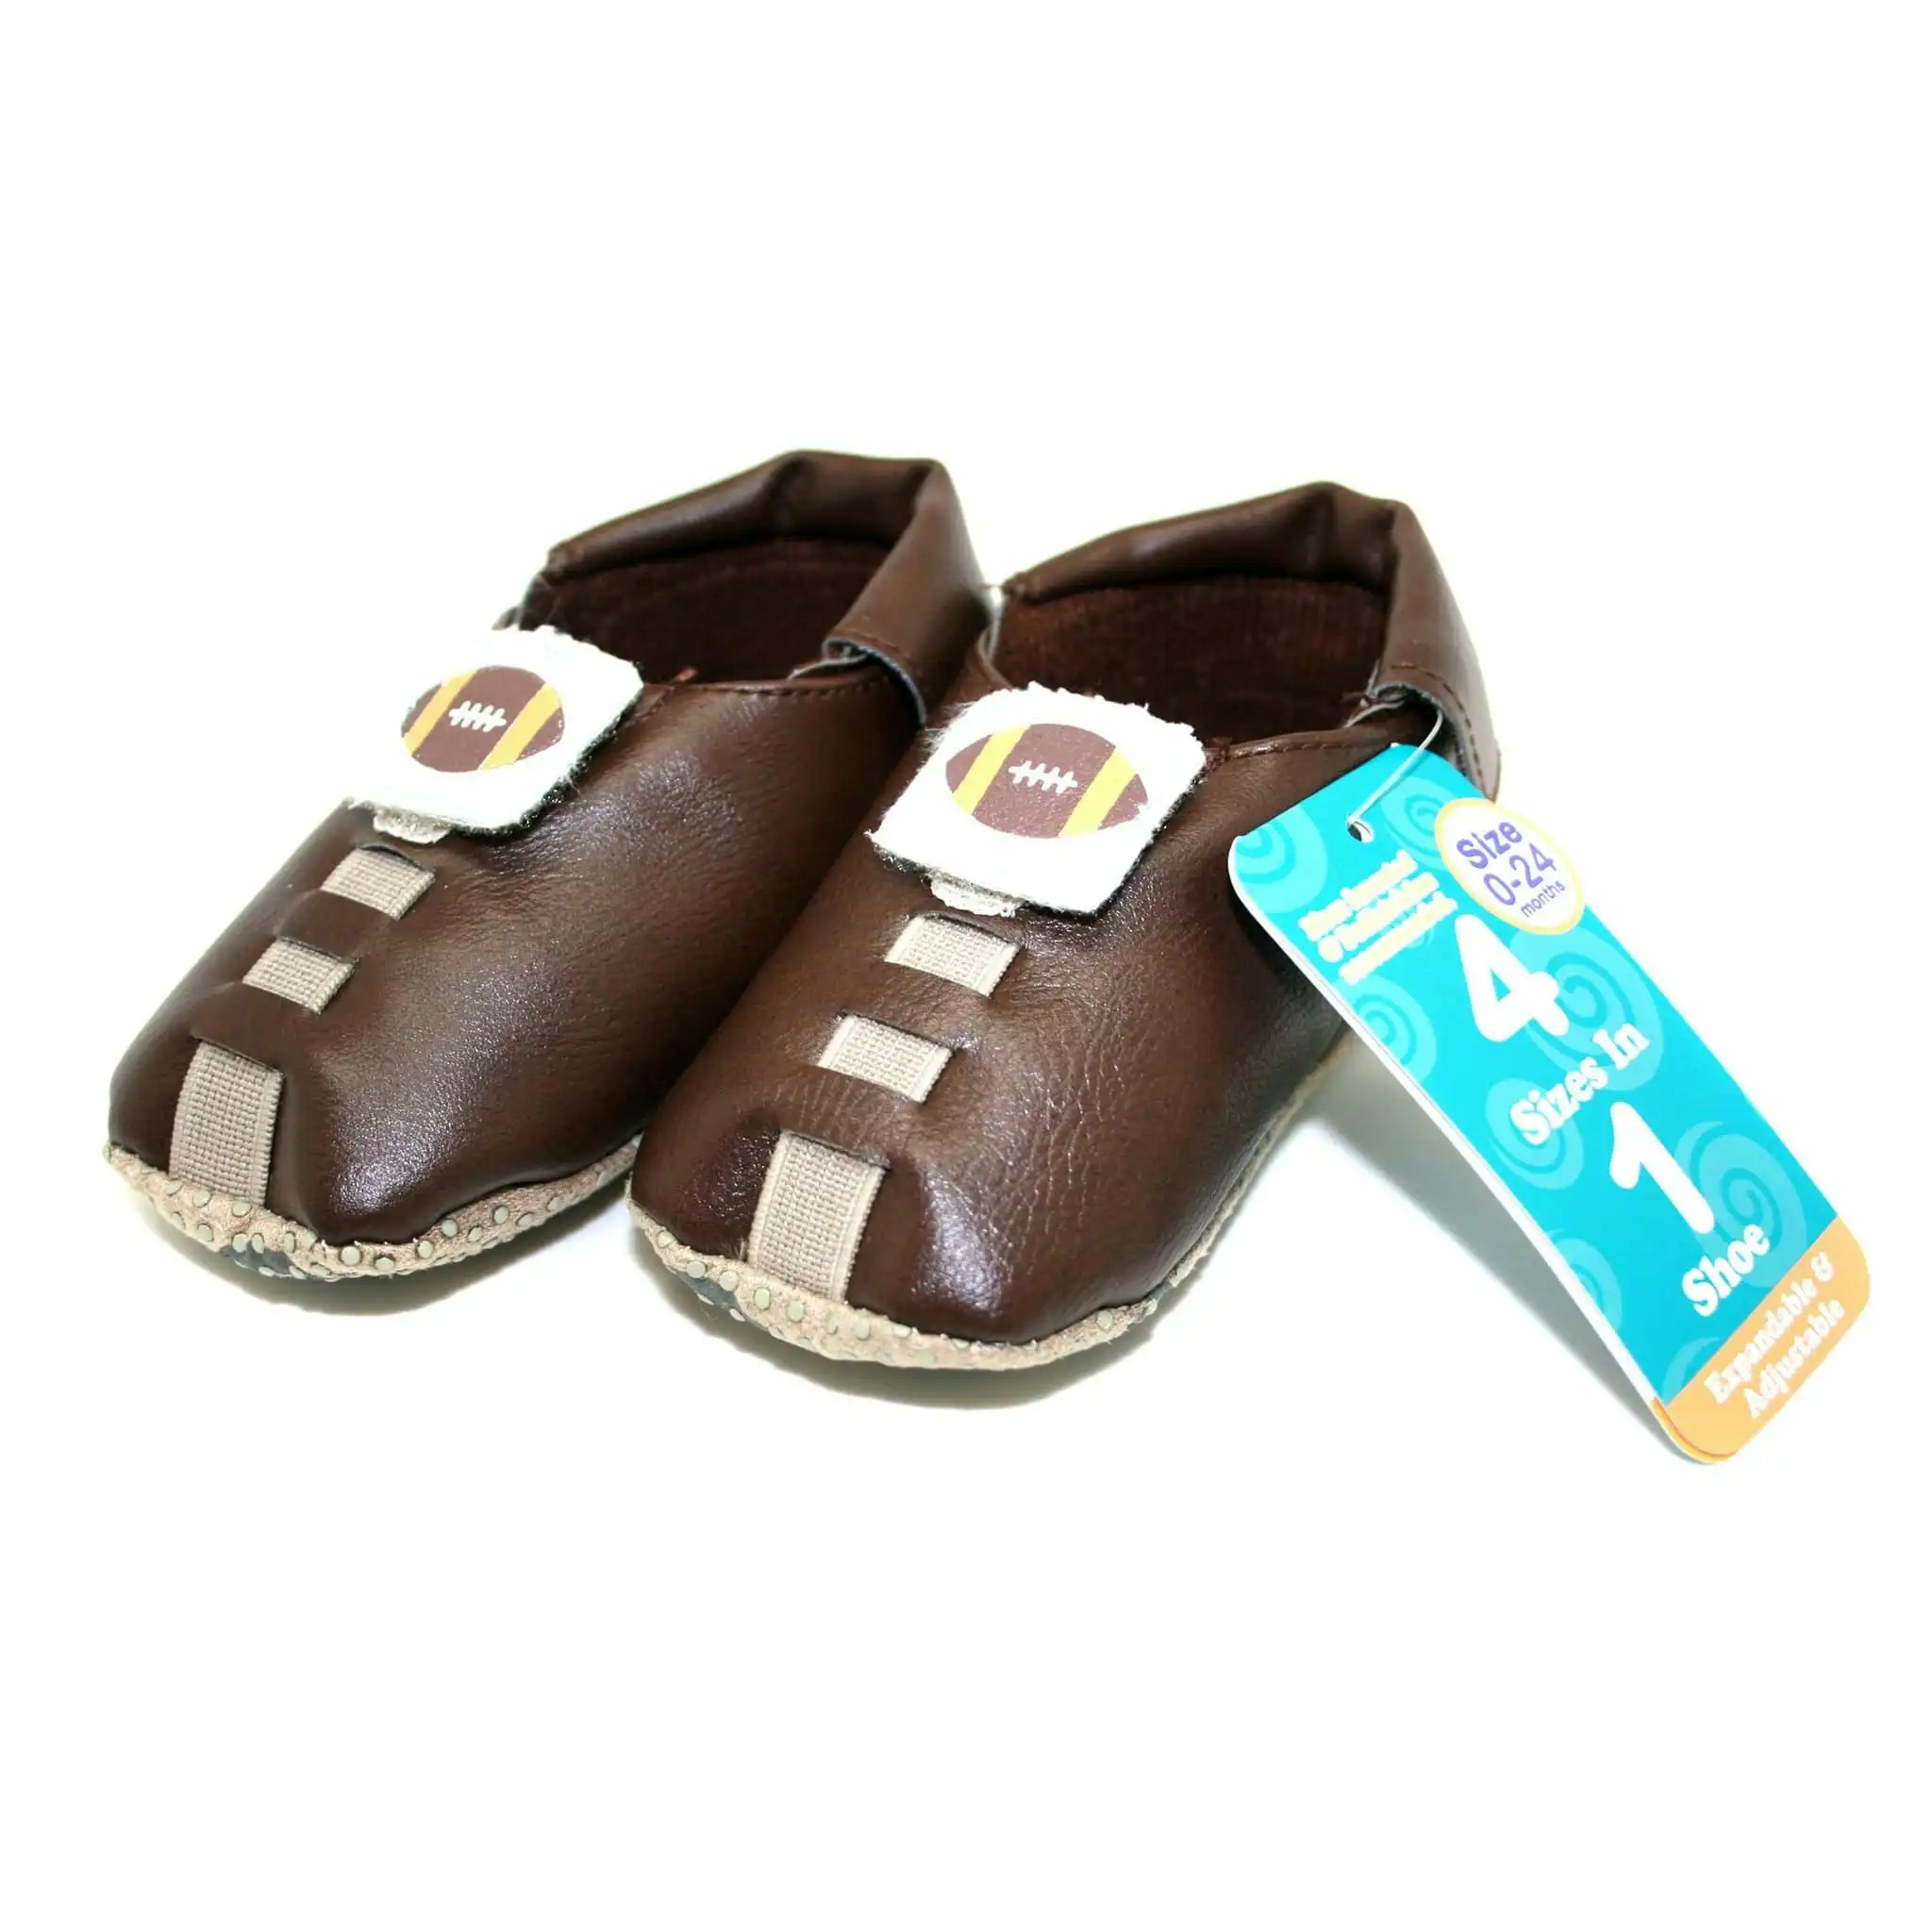 Shupeas Football Design - Expandable & Adjustable Soft Sole Baby Shoes